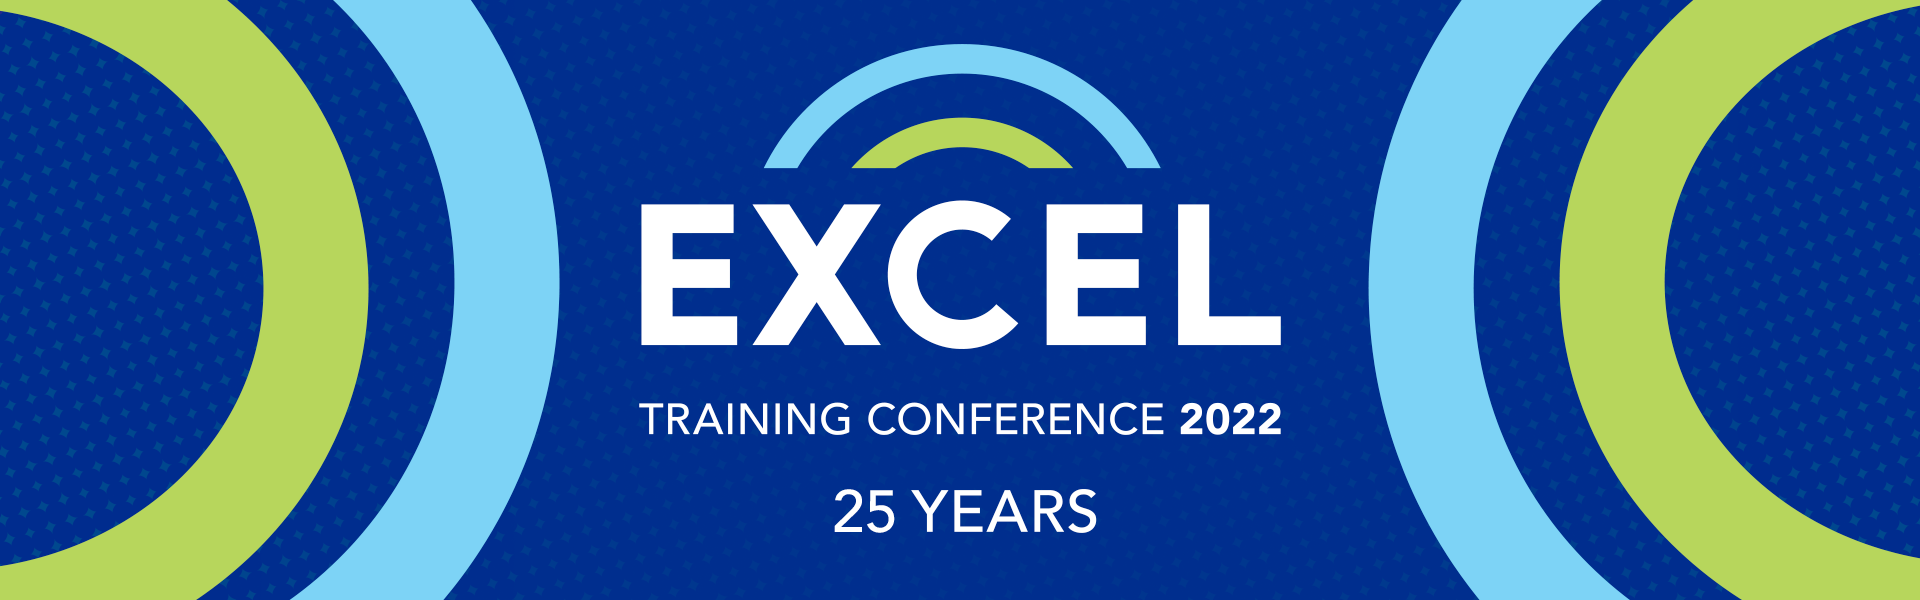 EXCEL Training Conference 2022 25 years